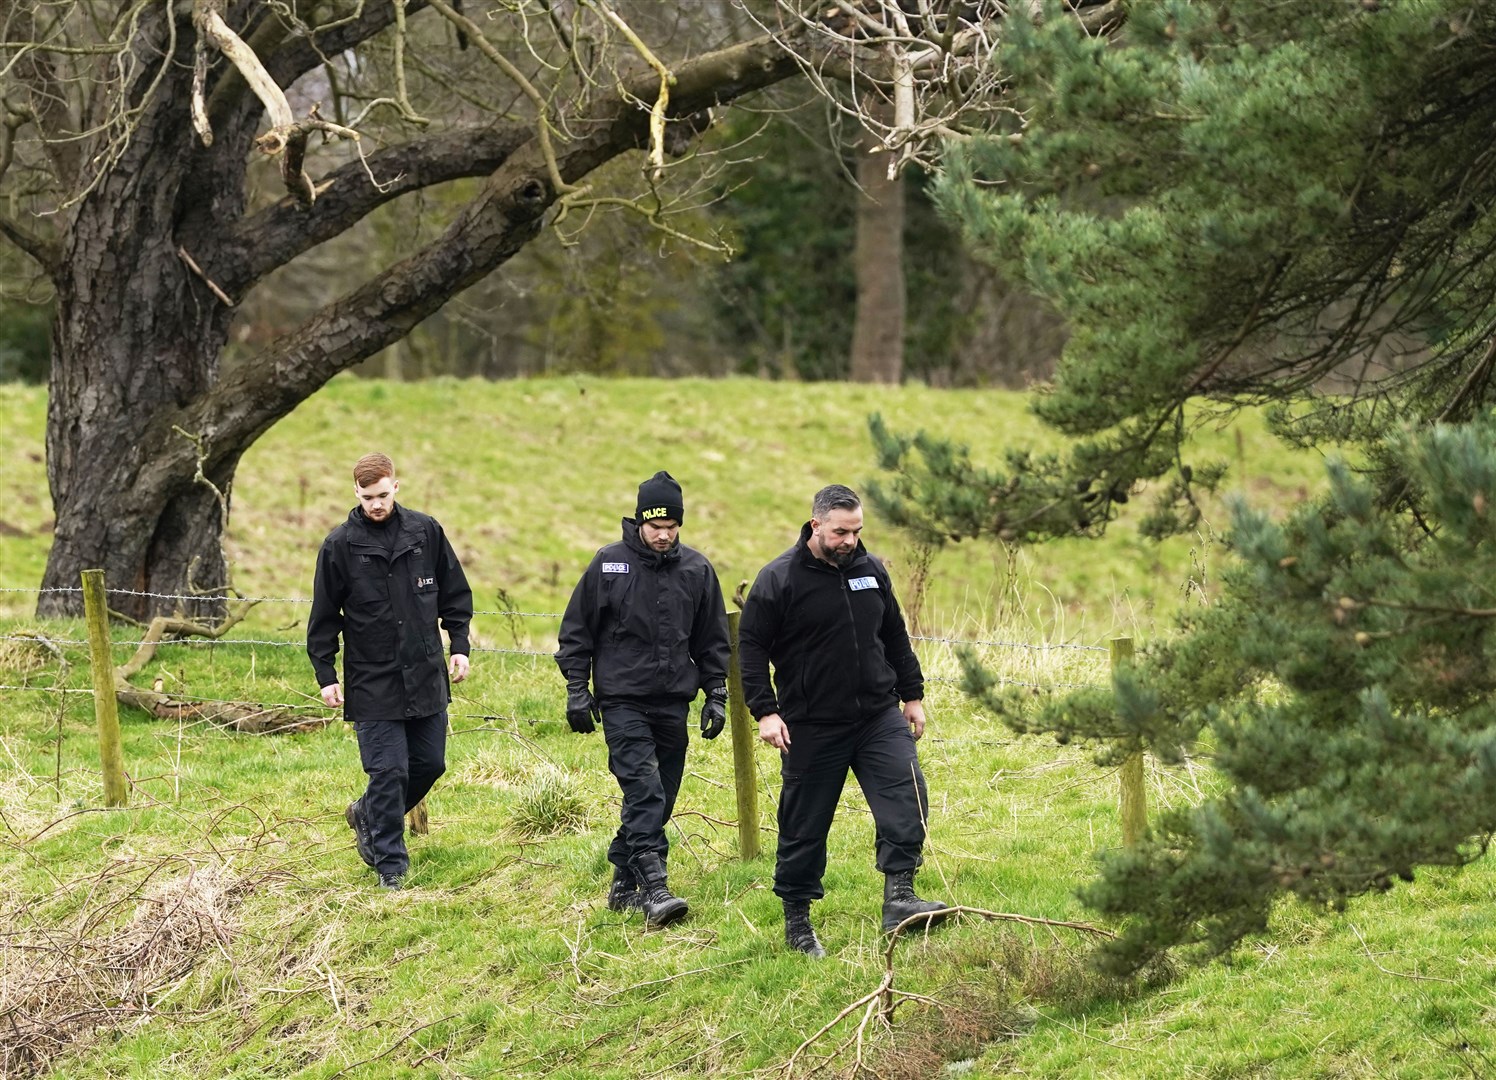 Police search teams in the area where Ms Bulley was last seen (Danny Lawson/PA)